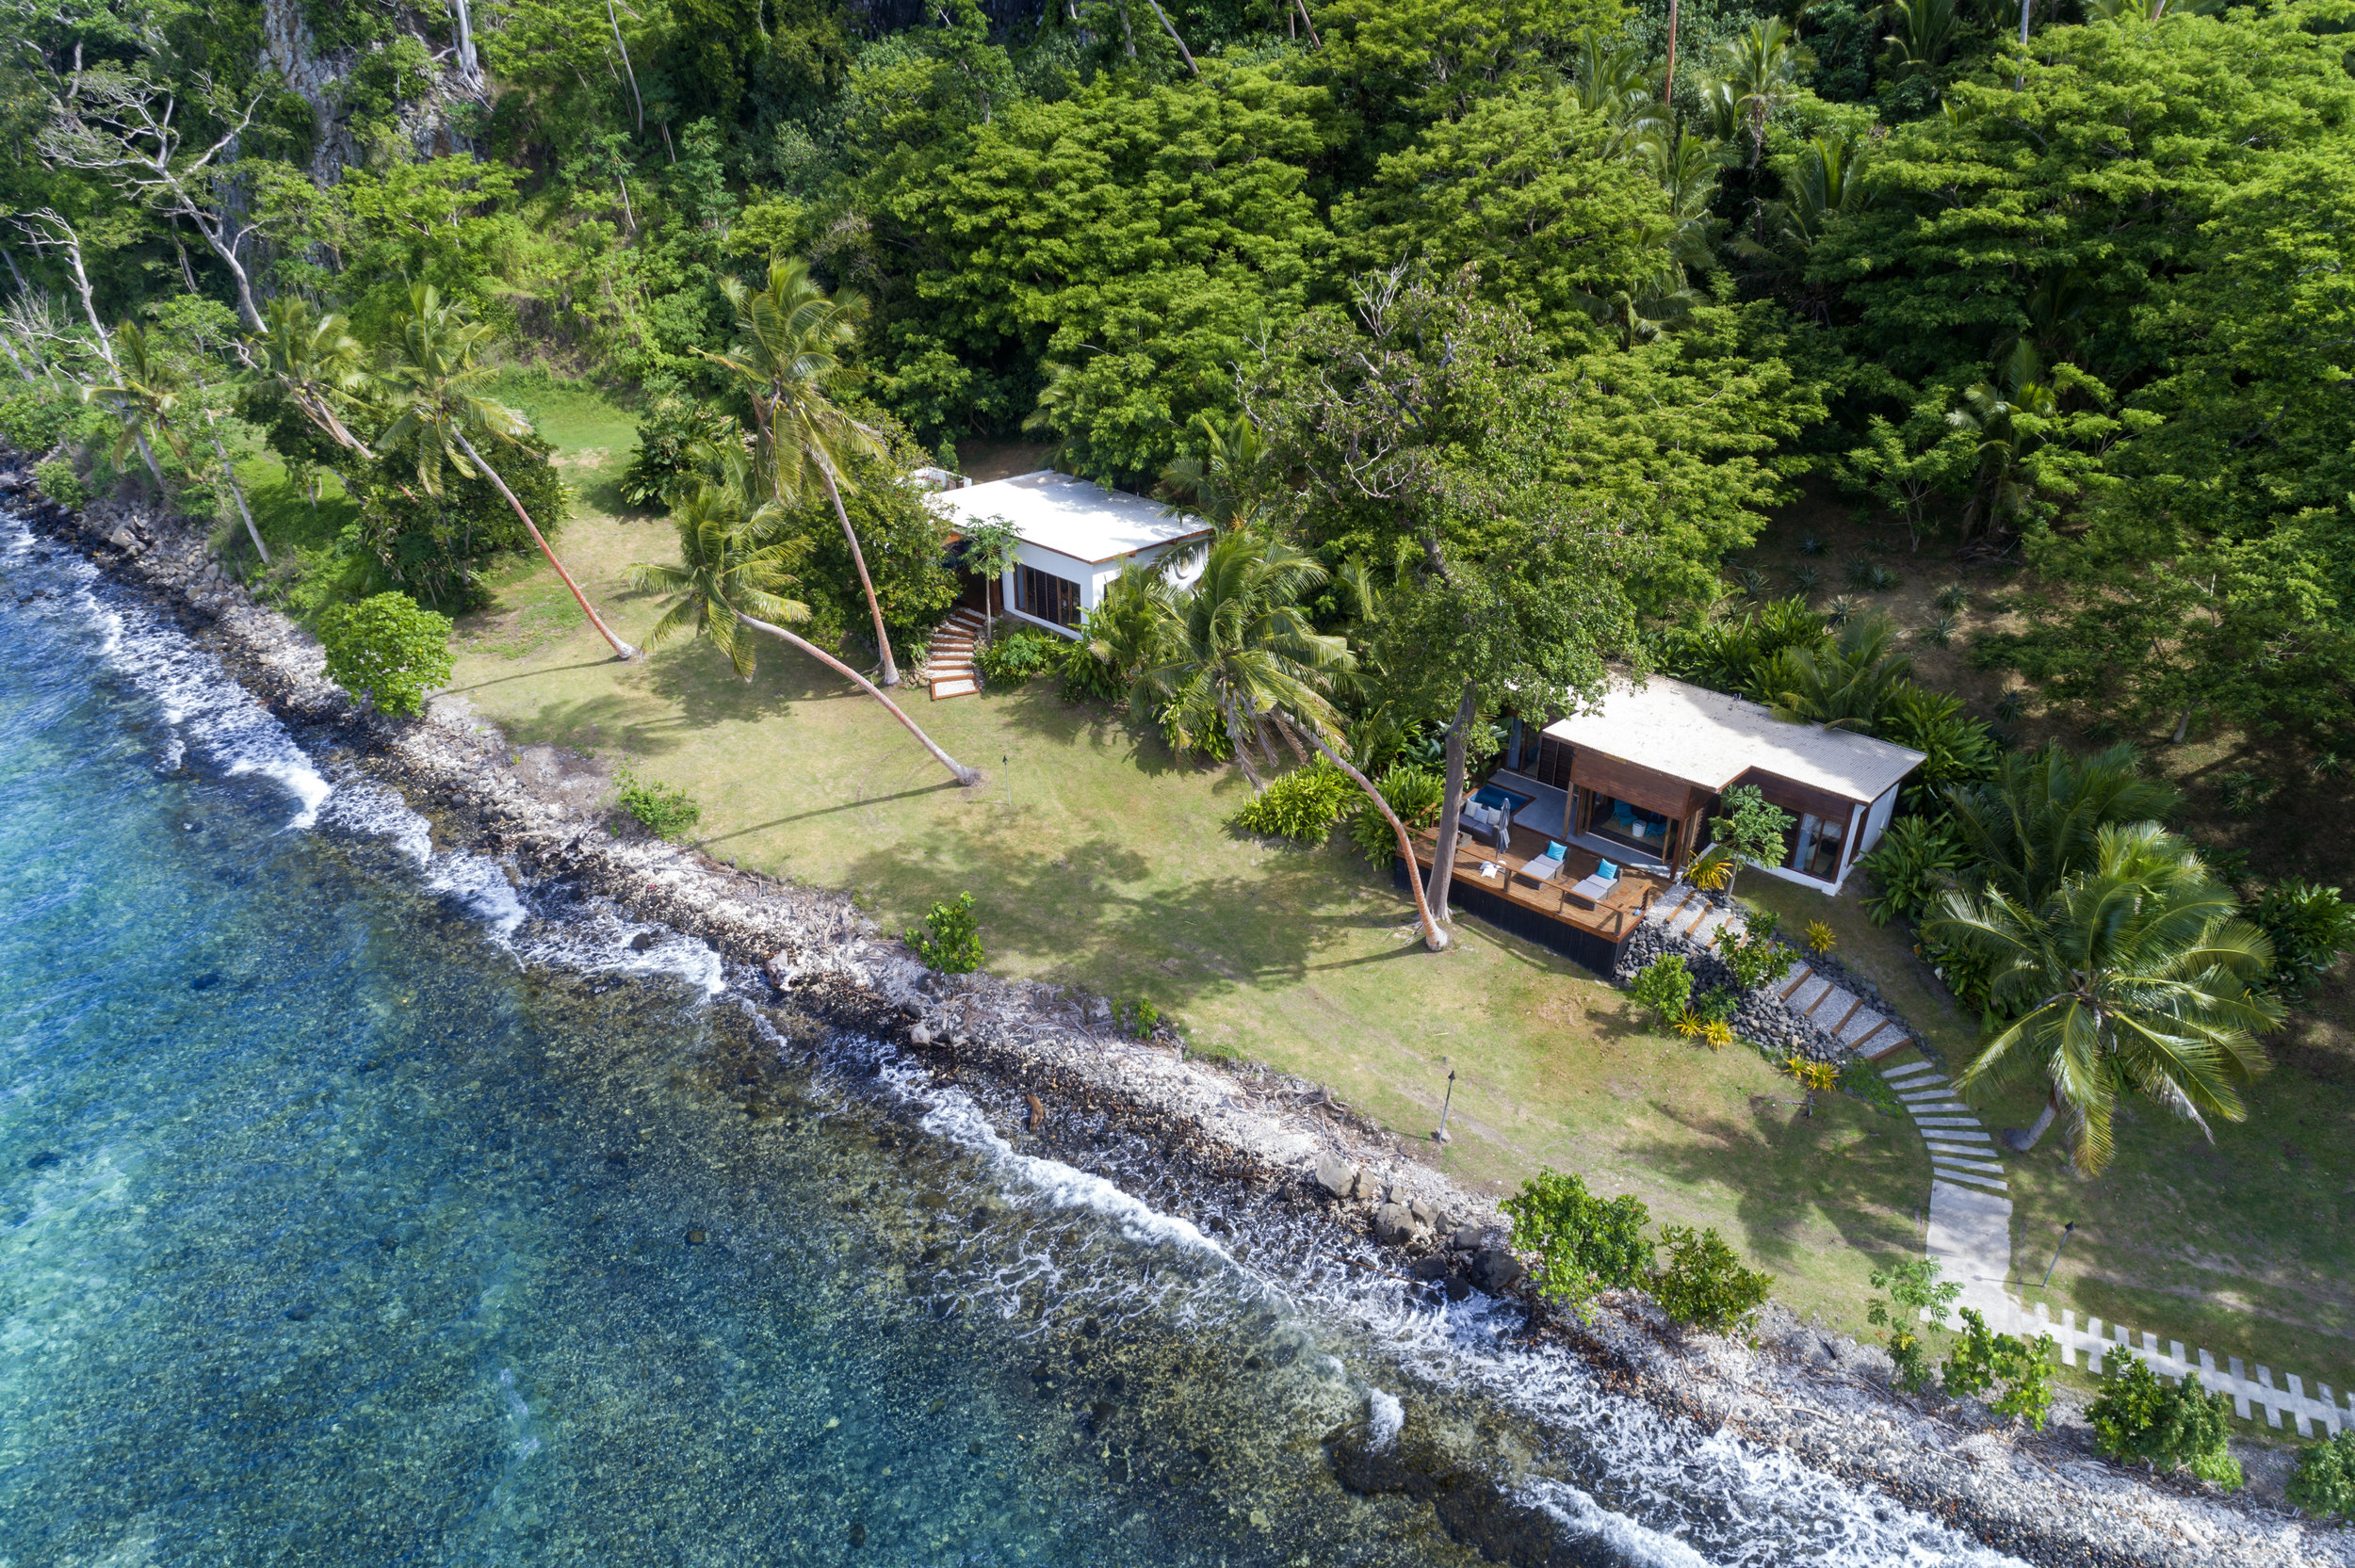 Two-bedroom villa (on the right) from the air, The Remote Resort Fiji Islands